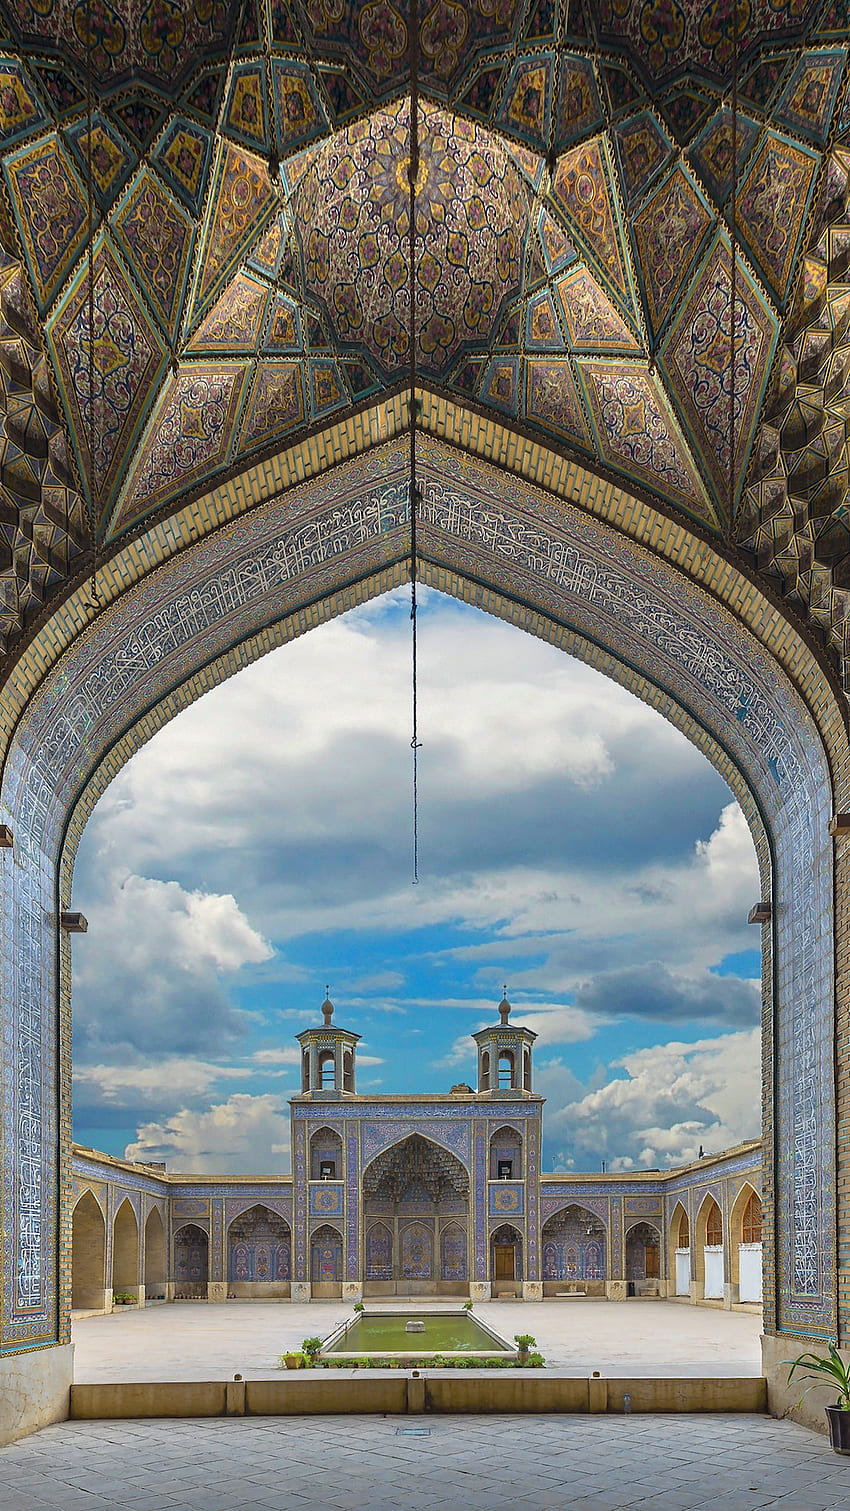 Green Dome In Flower's HD ( MASJID E NABWI ) by SHAHBAZRAZVI on DeviantArt